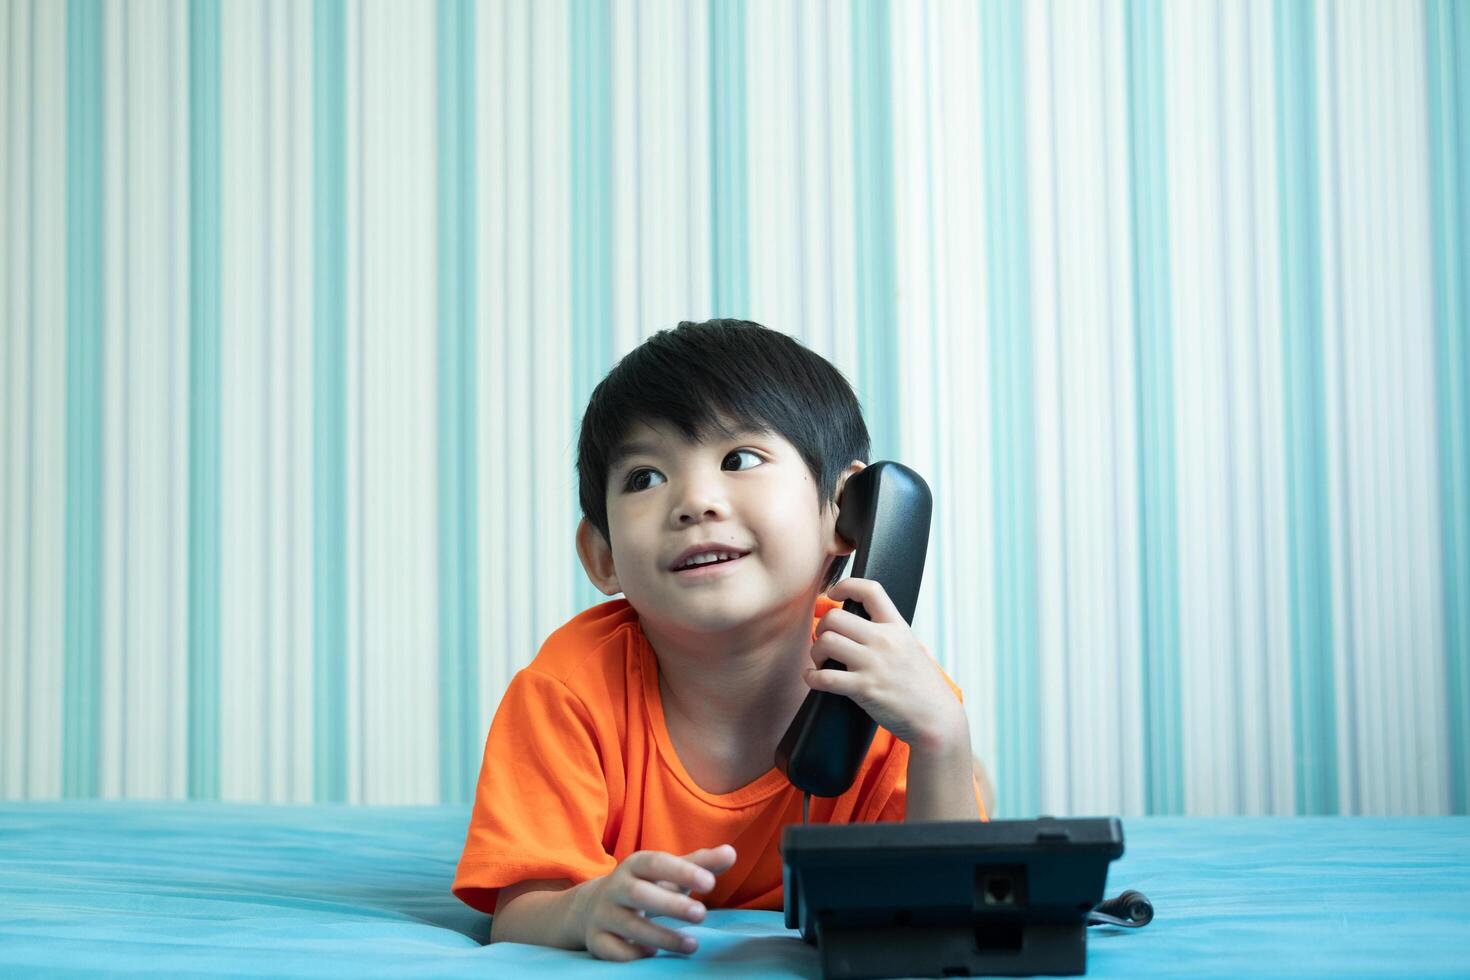 A little Asian boy lies on the bed talking on the phone. photo